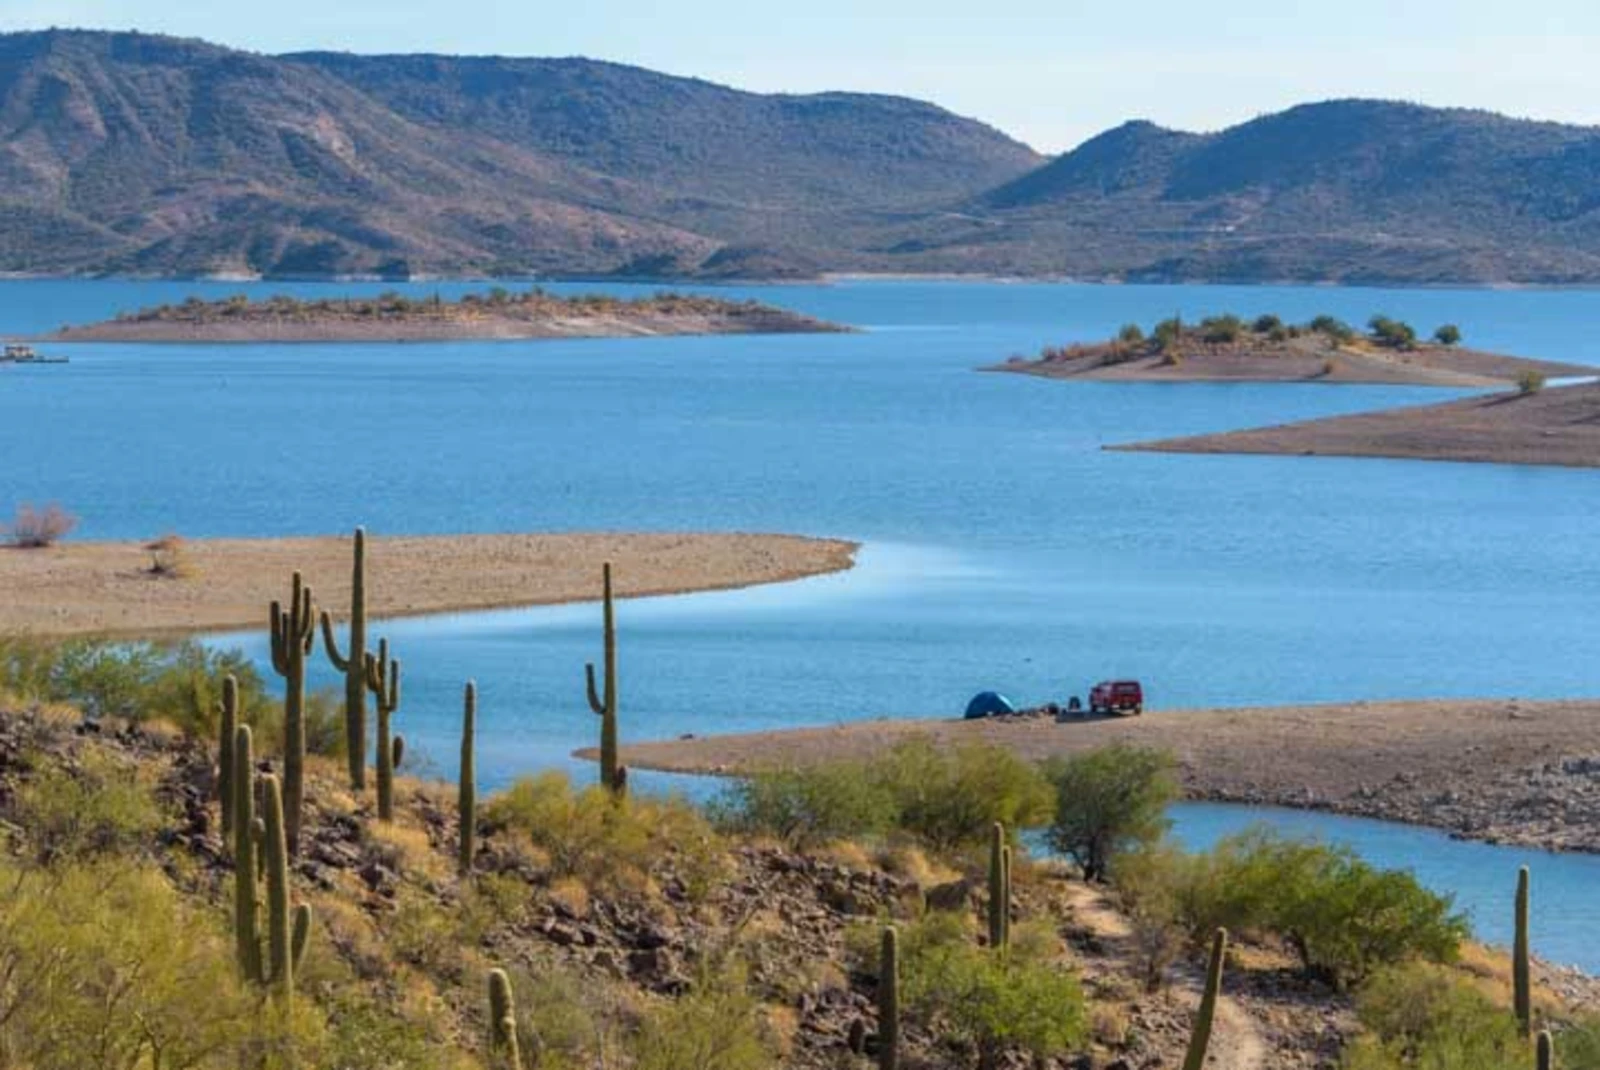 Lake Pleasant is the largest lake in the Phoenix and Scottsdale area.